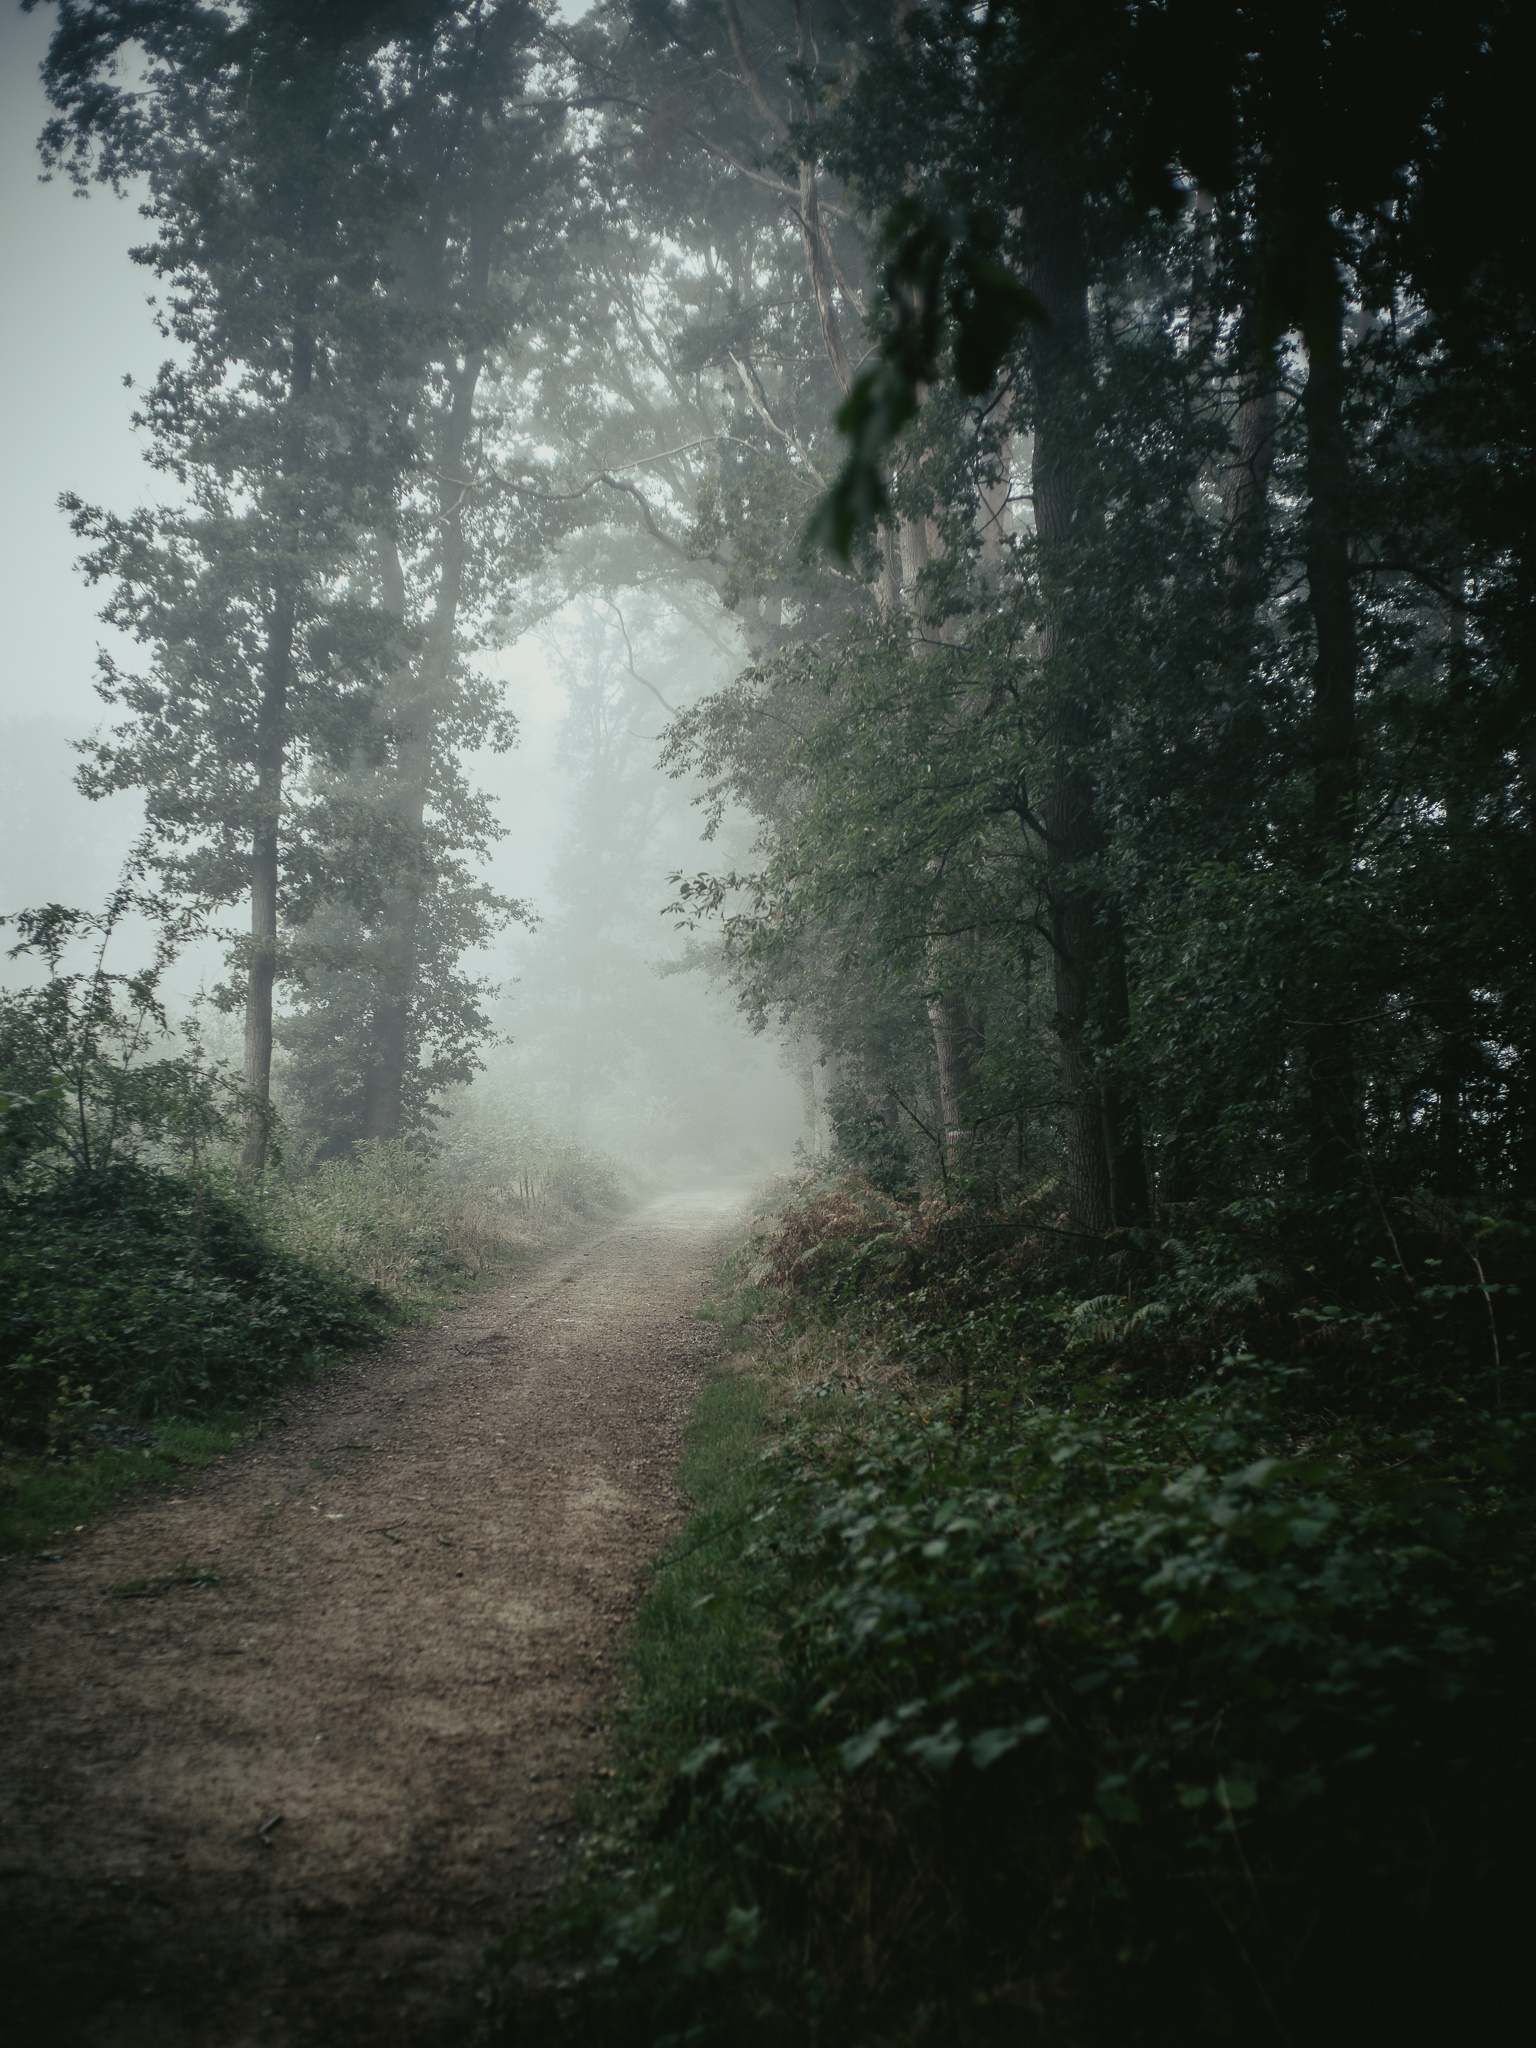 Misty Woods seen and photographed by Martin Nienberg